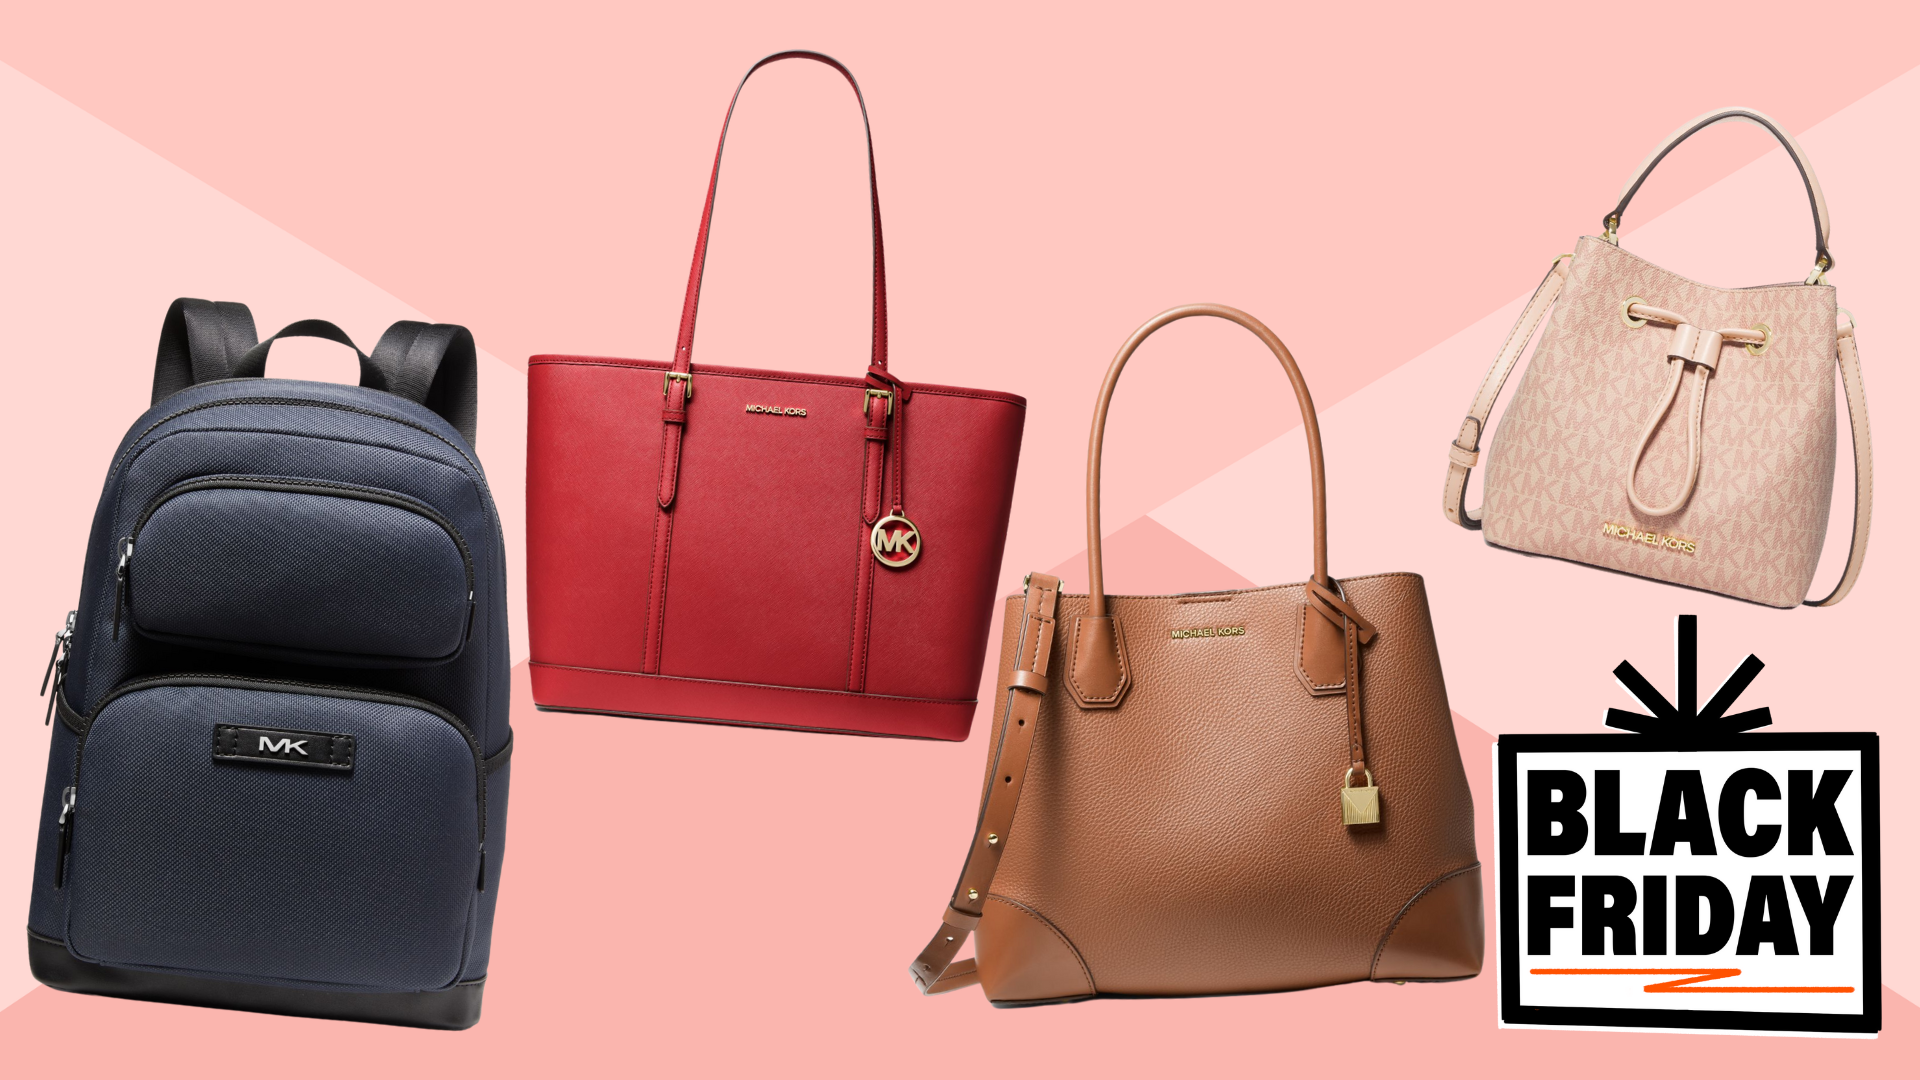 Save on Michael Kors purses, watches and